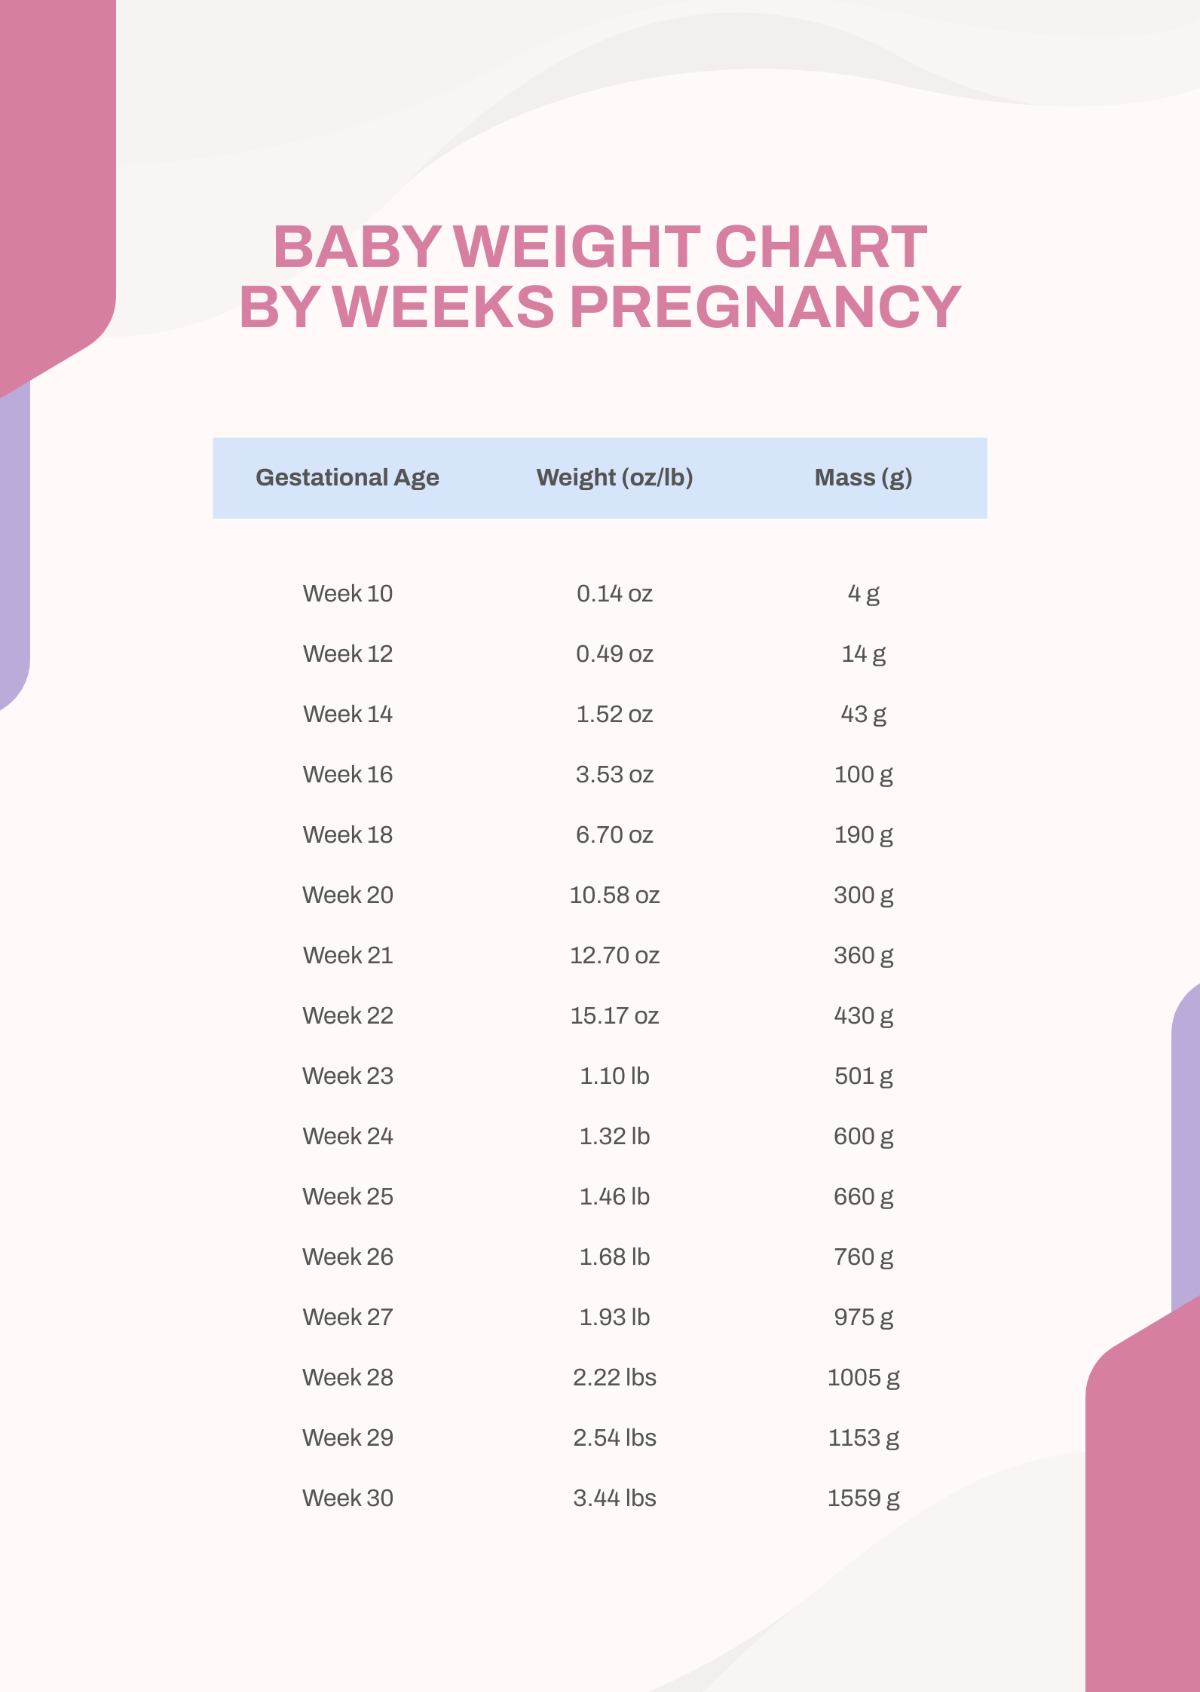 Baby Weight Chart By Weeks Pregnancy Template - Edit Online & Download ...